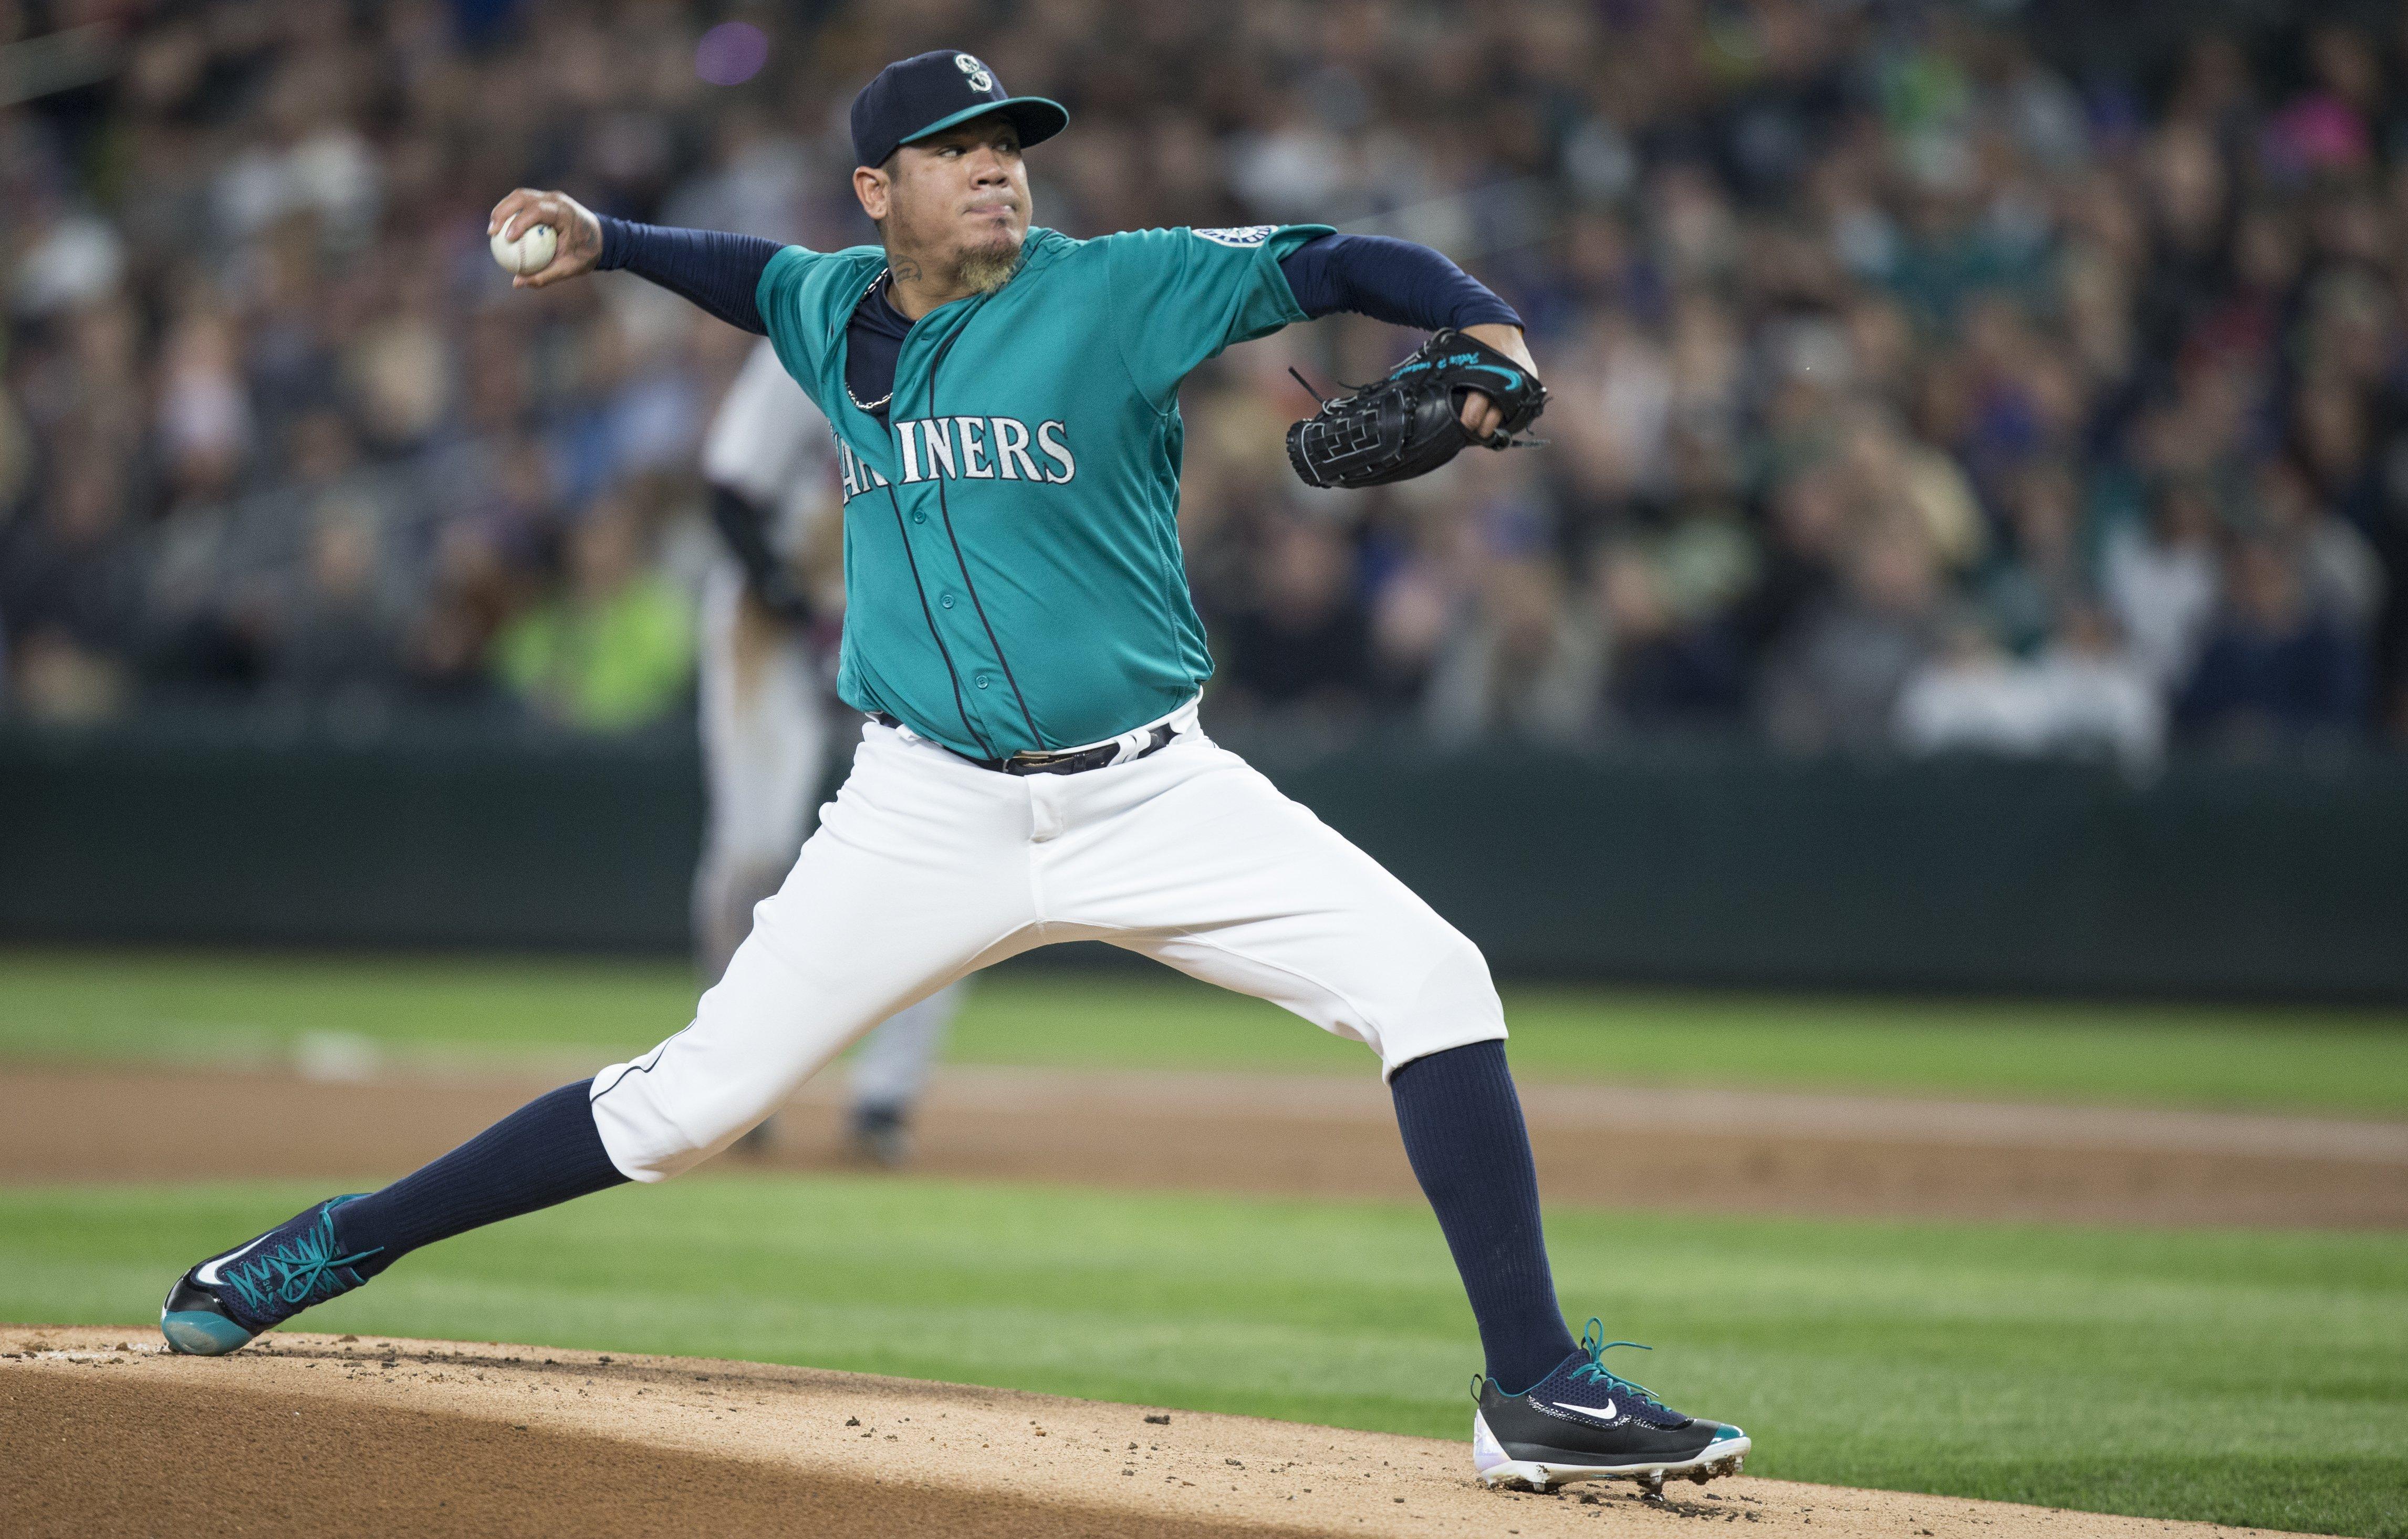 Seattle Mariners Wallpaper Image Photo Picture Background